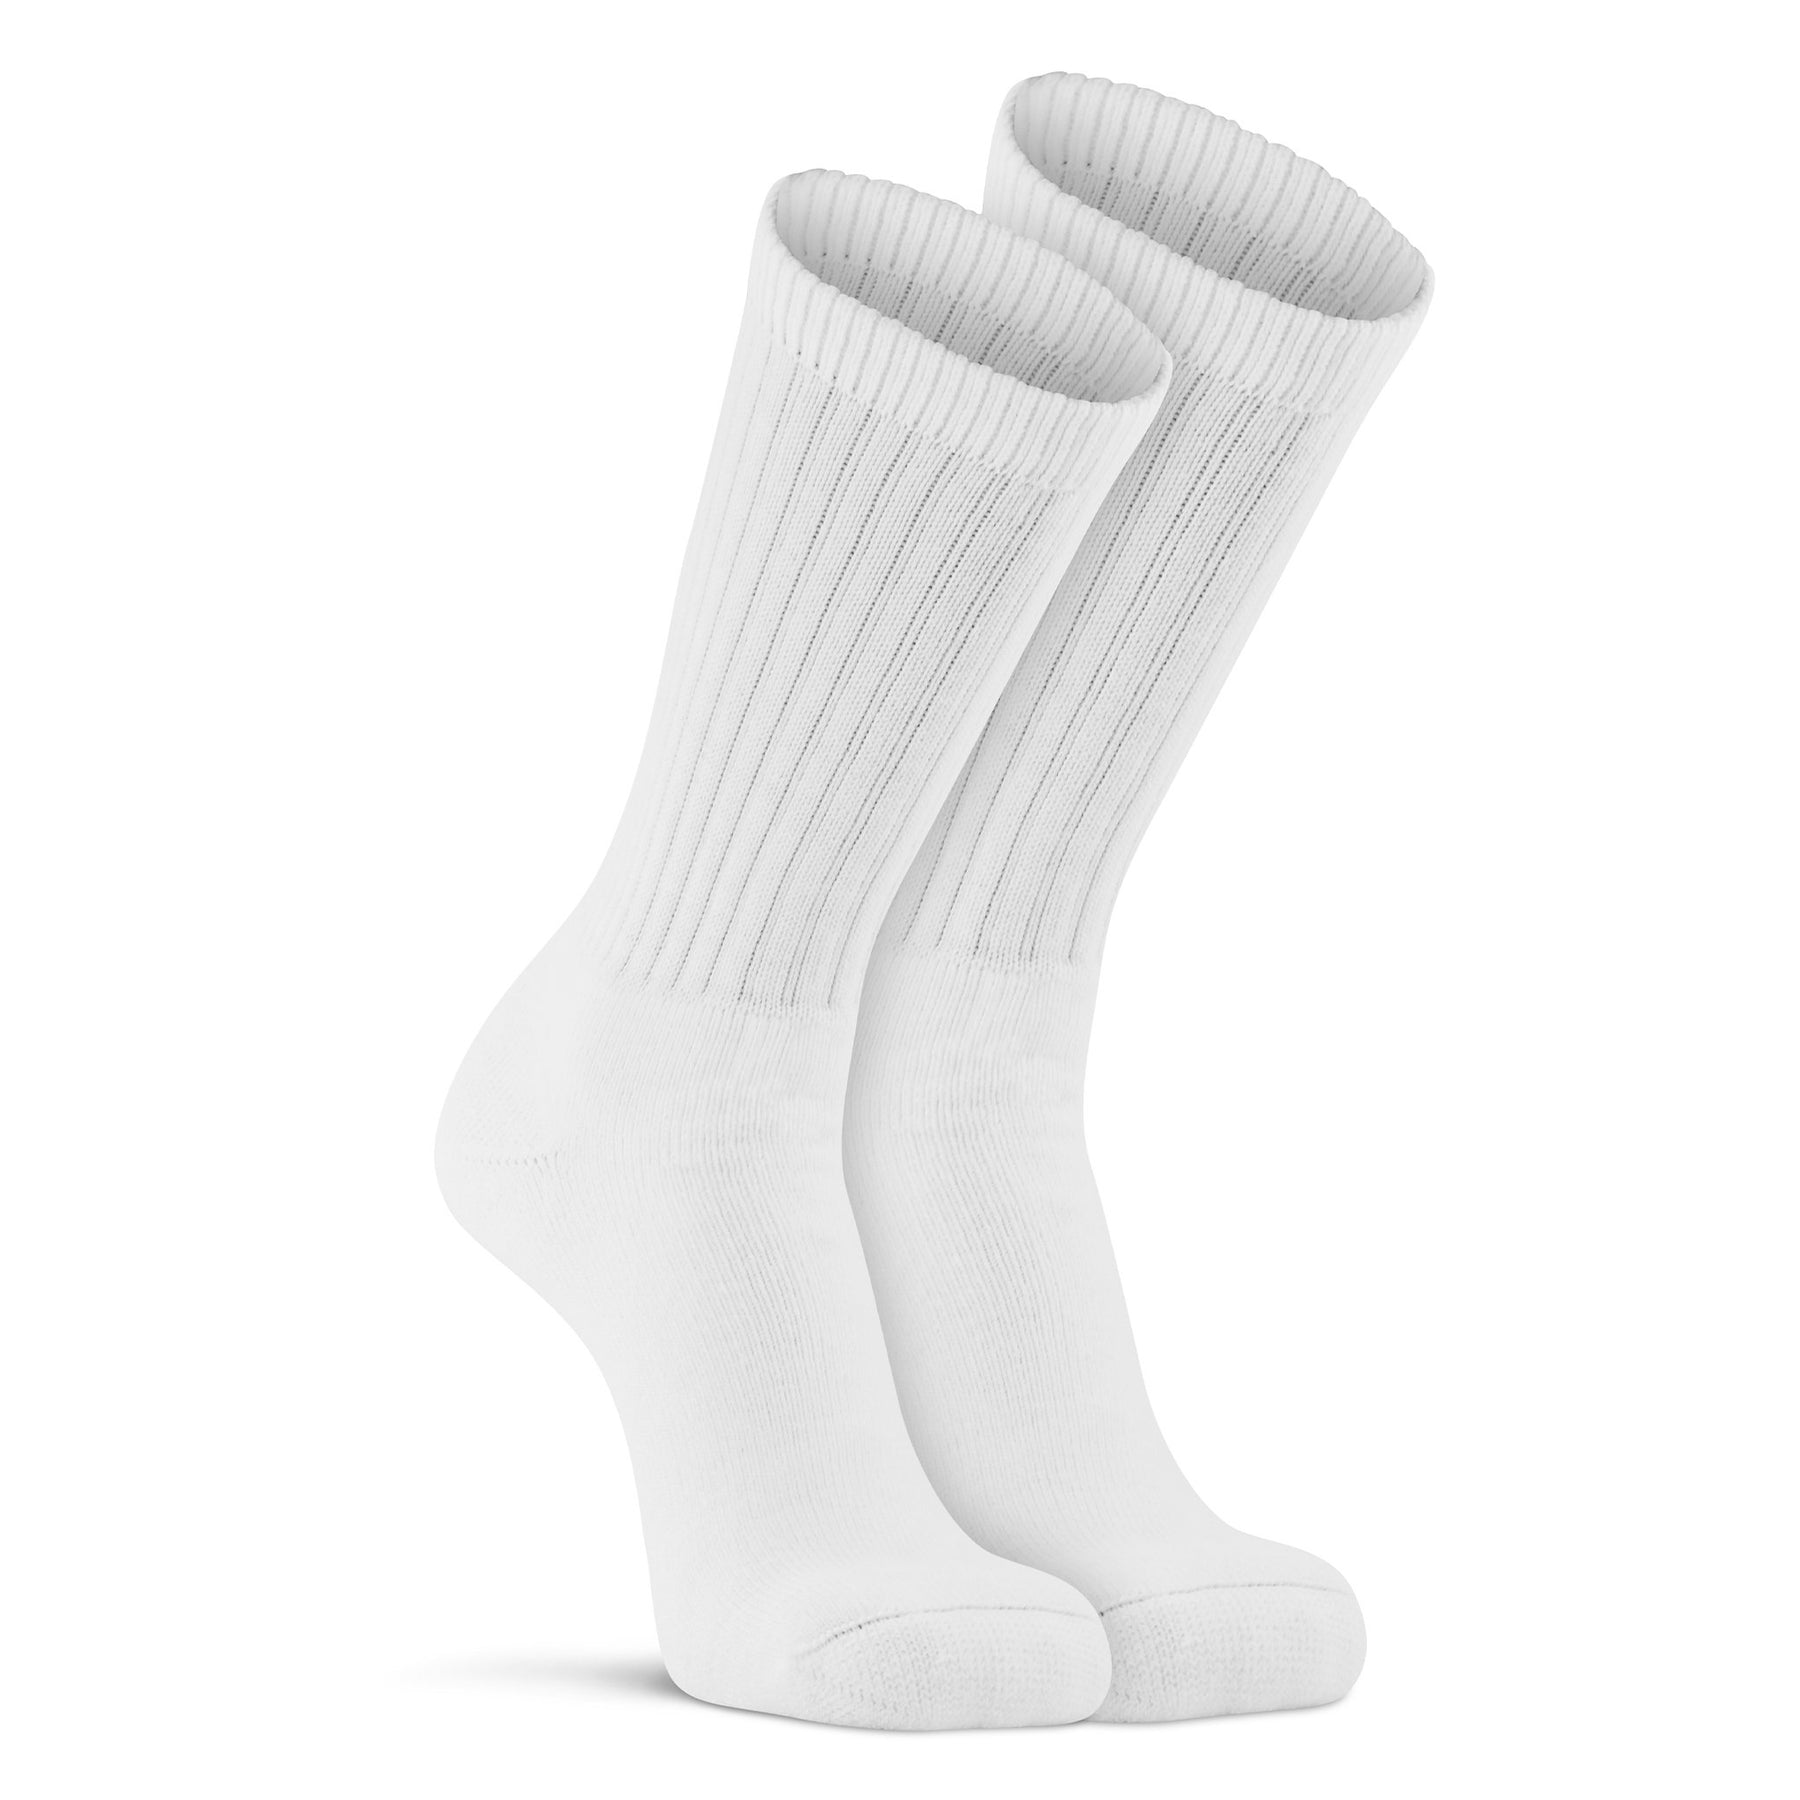 Deadstock White Cotton Crew Socks Large Made in USA Ivy 